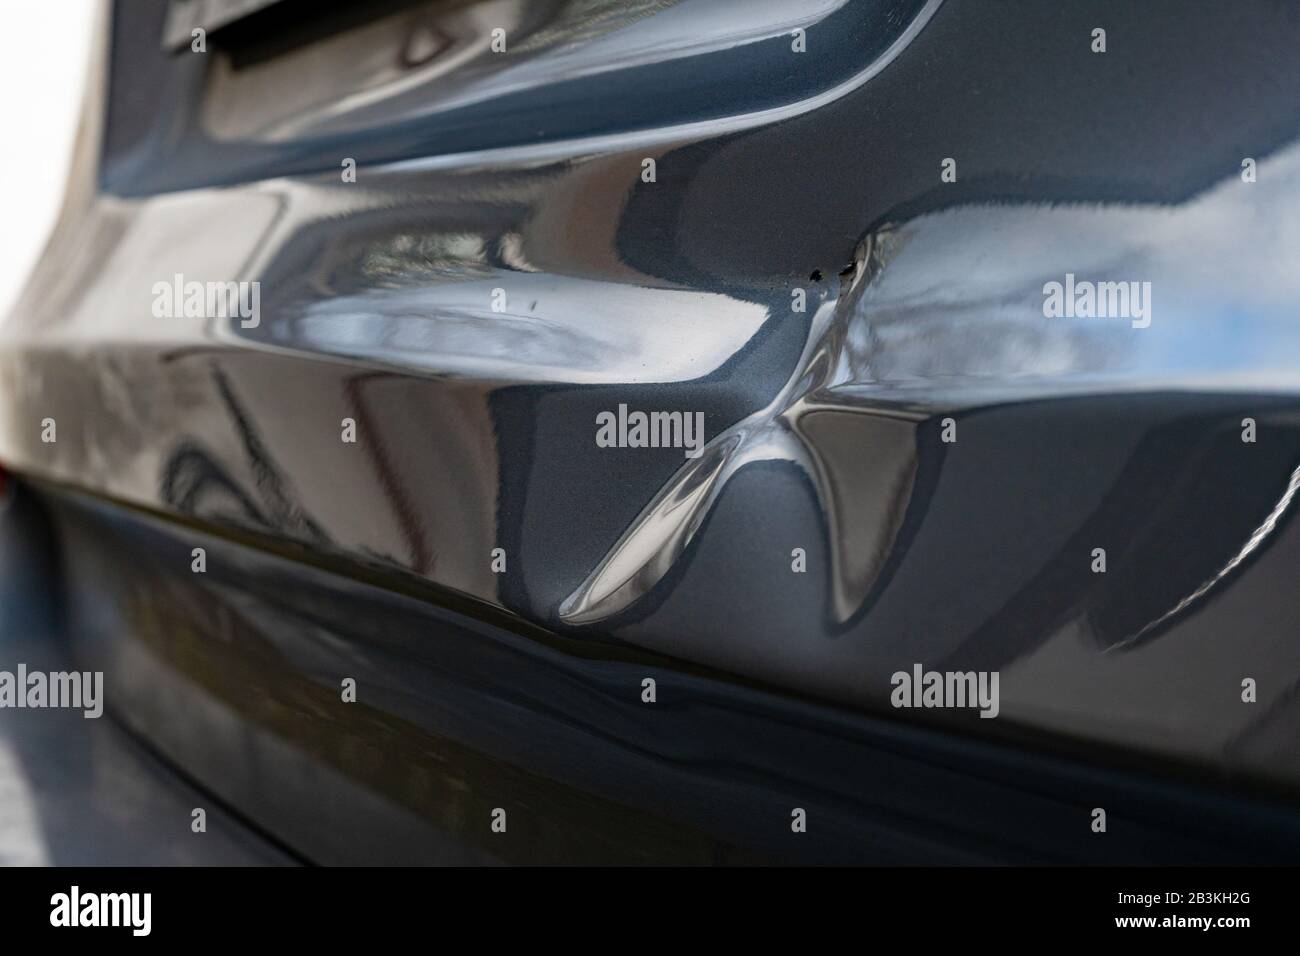 A dent in the body of a silver car Stock Photo